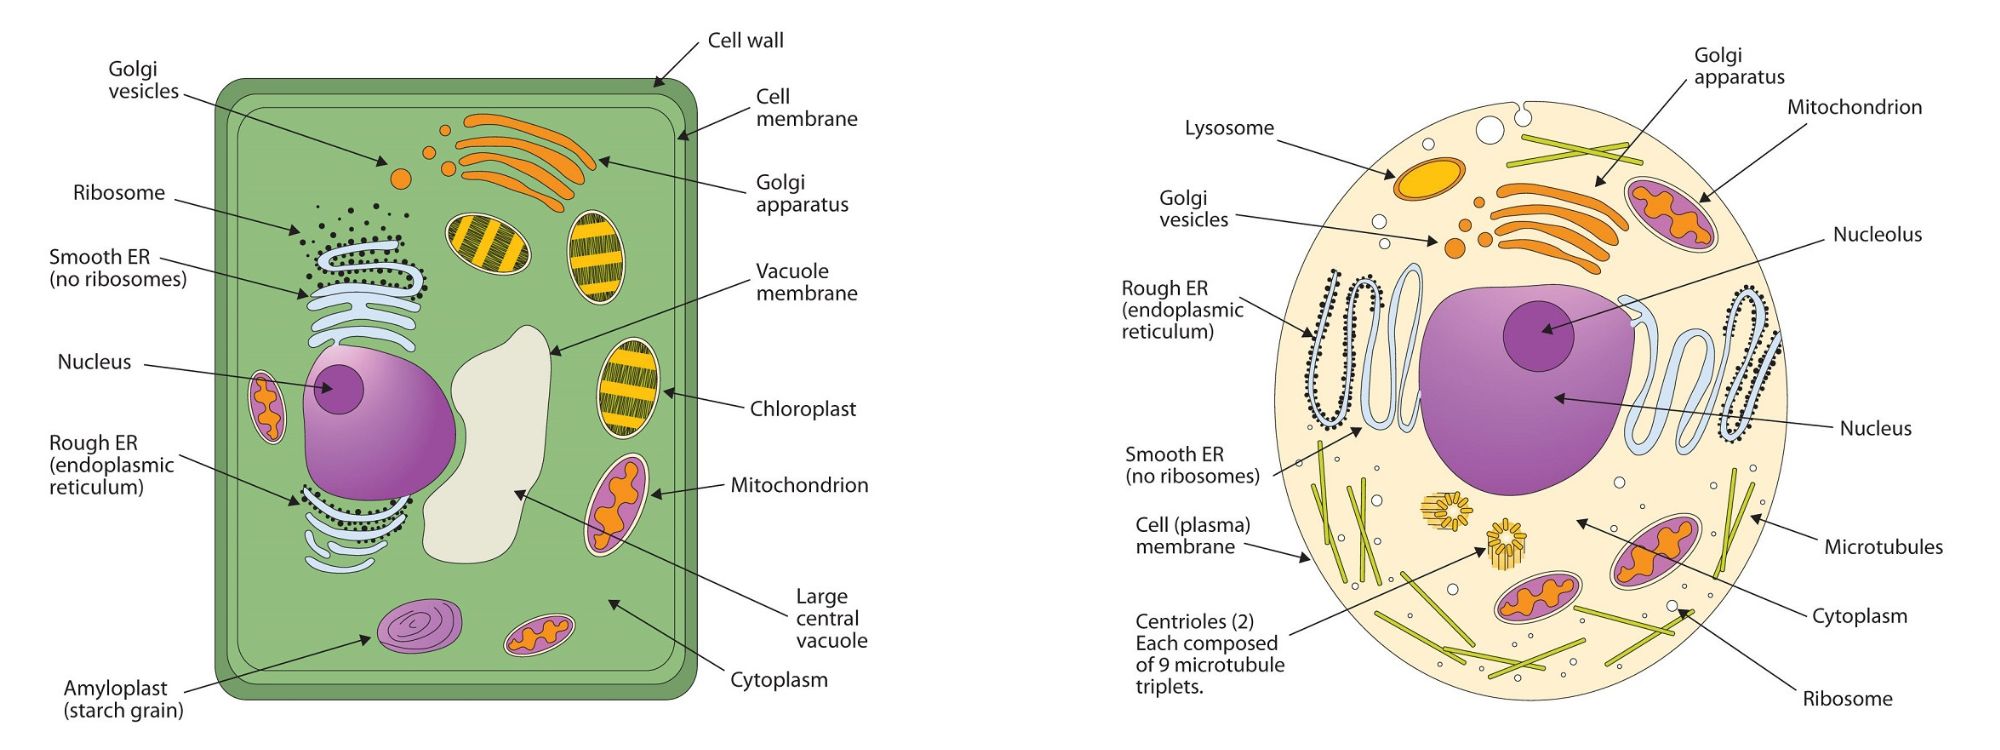 A plant cell (on the left) and an animal cell (on the right)